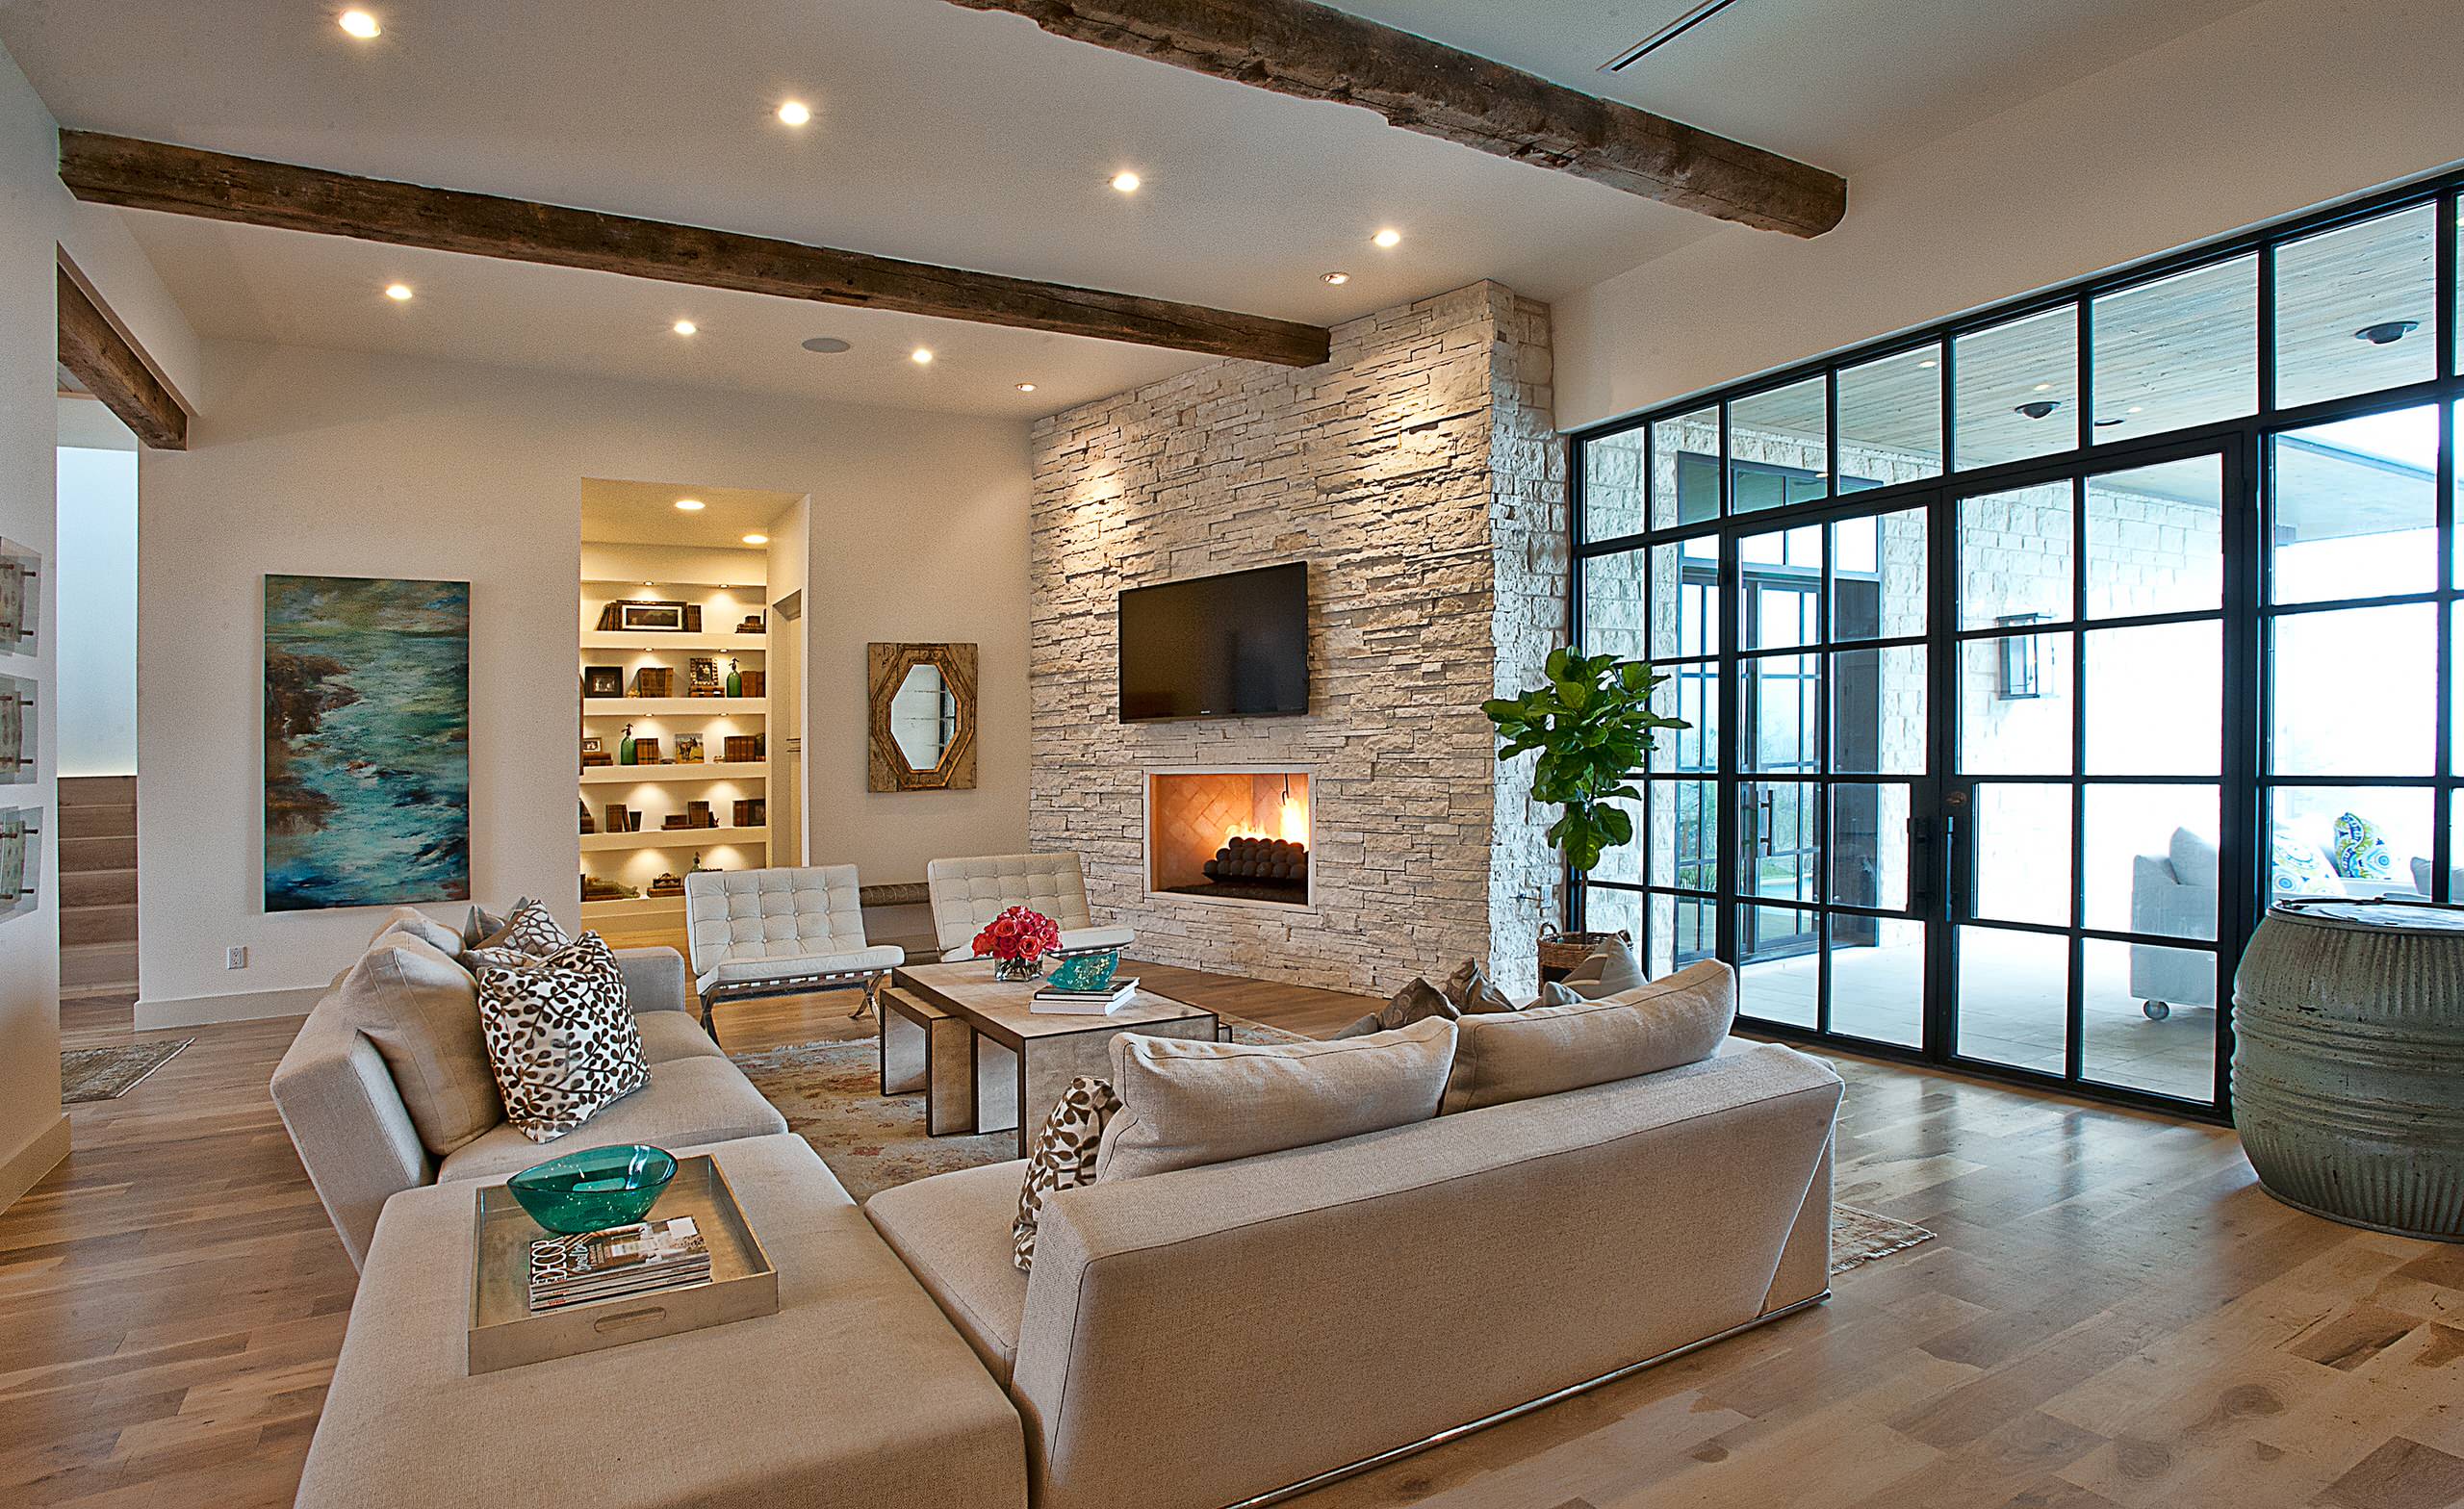 75 Beautiful Living Room With A Wall Mounted Tv Pictures Ideas April 2021 Houzz